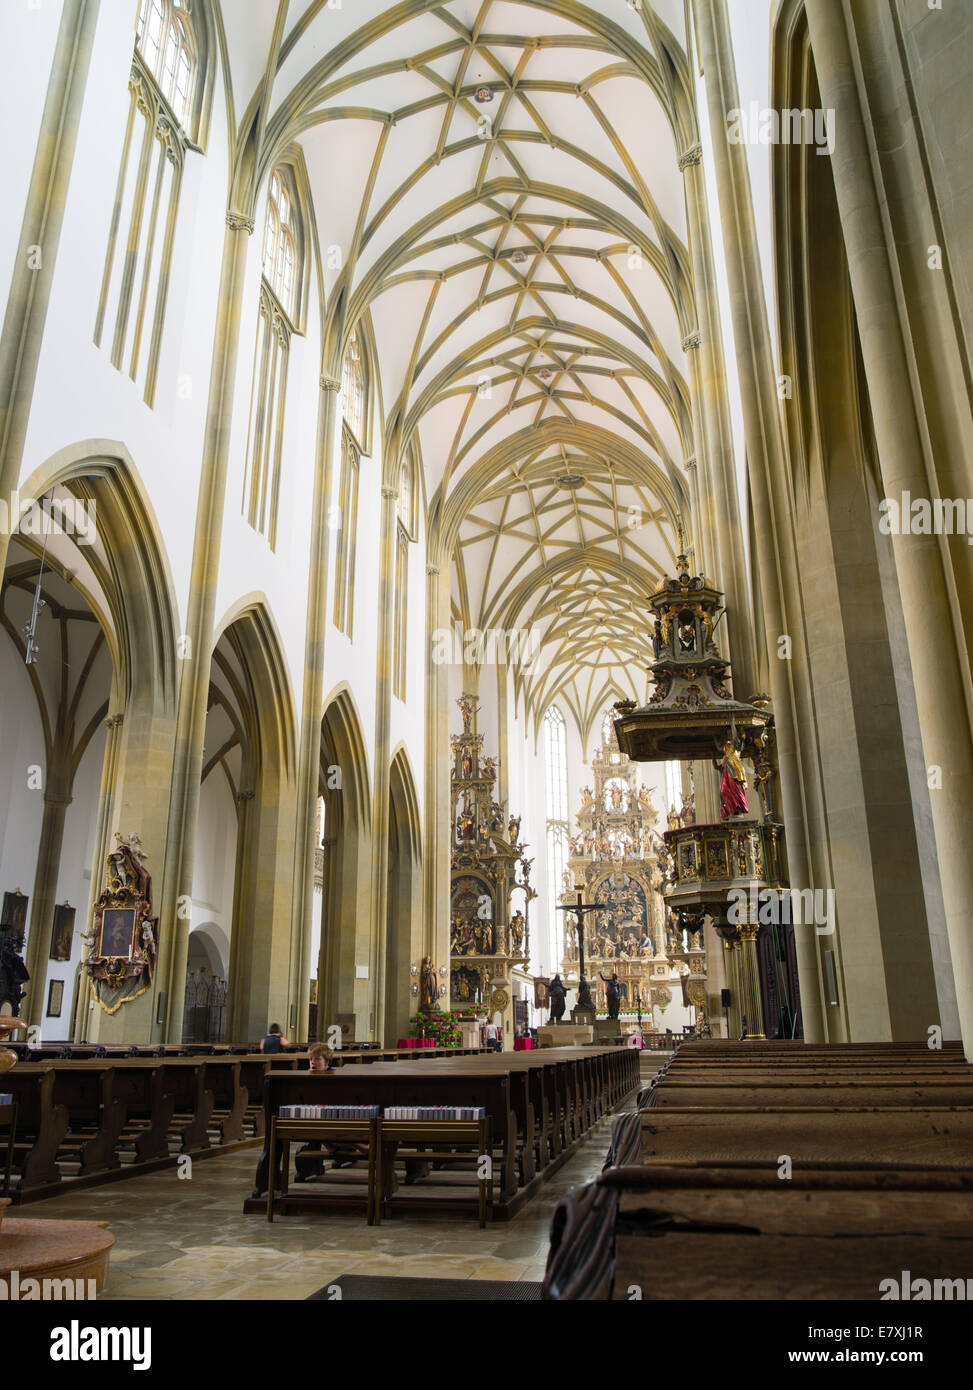 Interior view of the Basilica of St. Ulrich and St. Afra, Augsburg, Bavaria, Germany Stock Photo